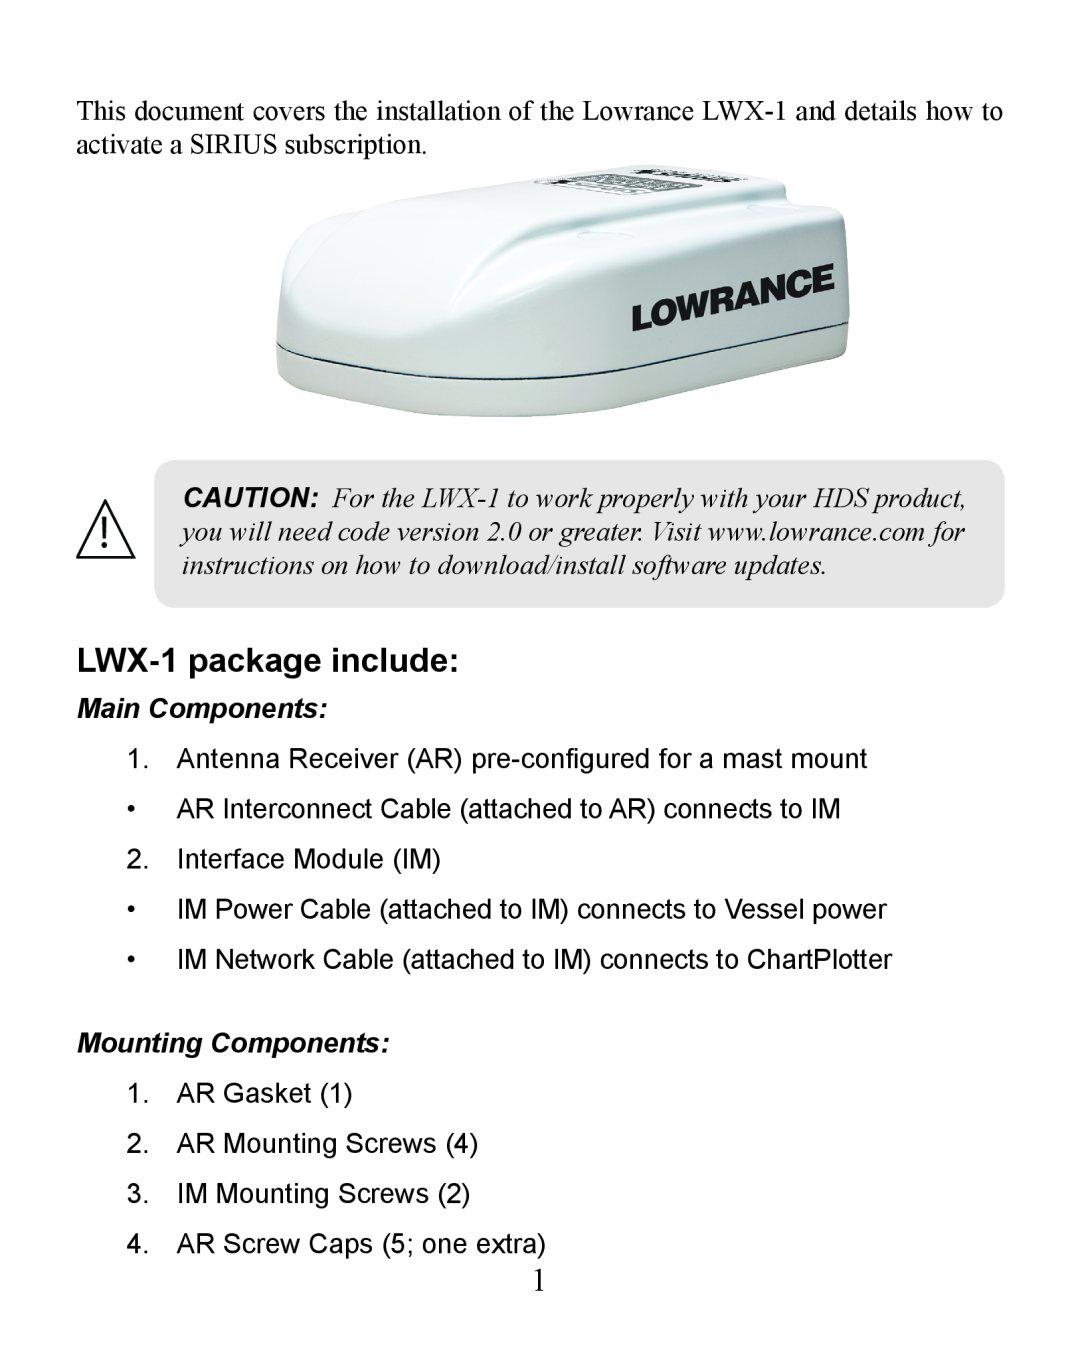 Lowrance electronic installation instructions LWX-1package include, Main Components, Mounting Components 